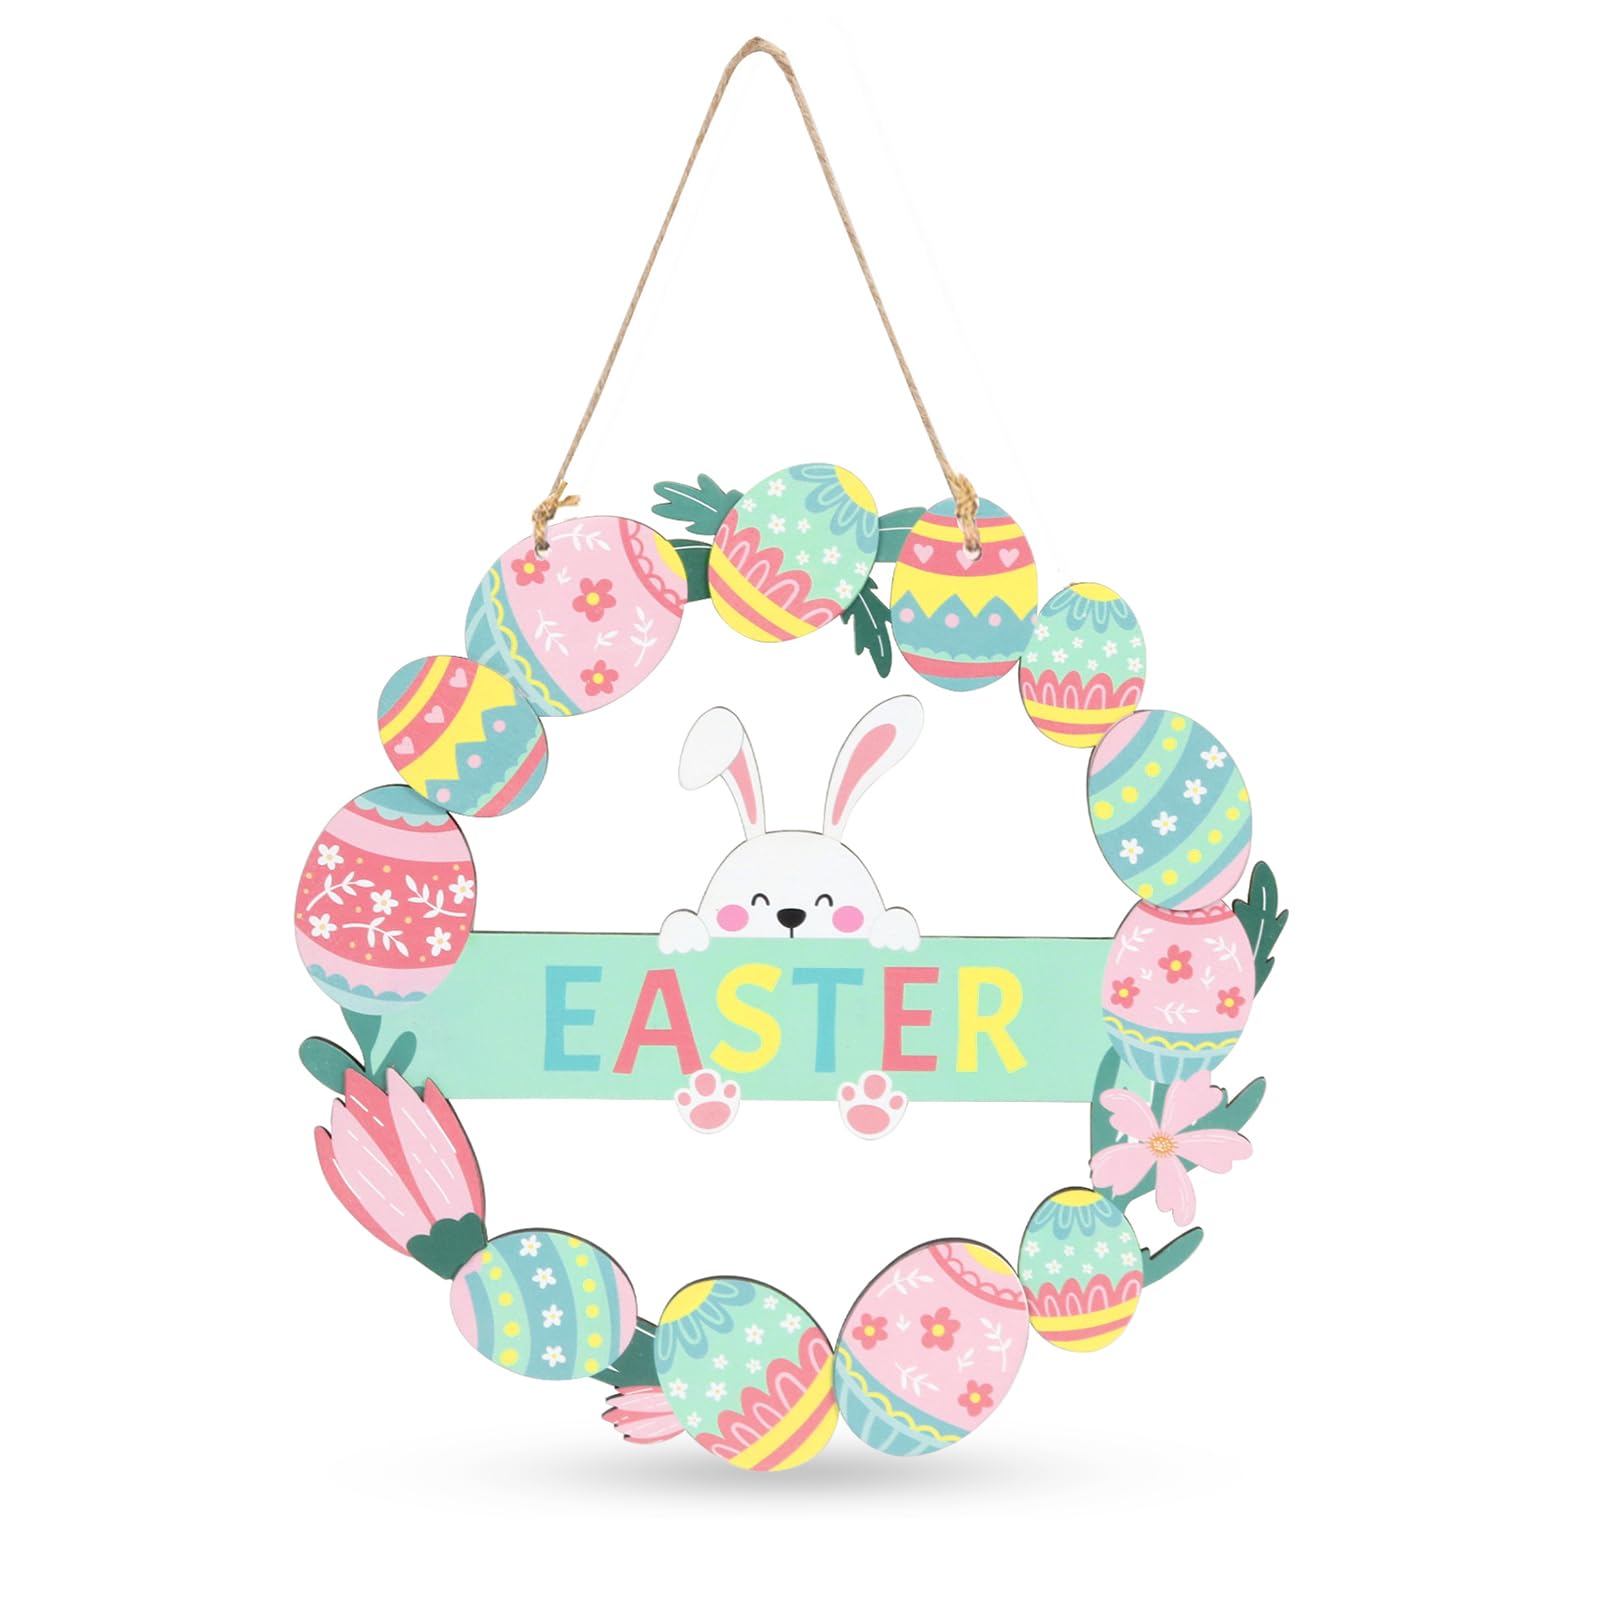 Great Easter Wreath 6